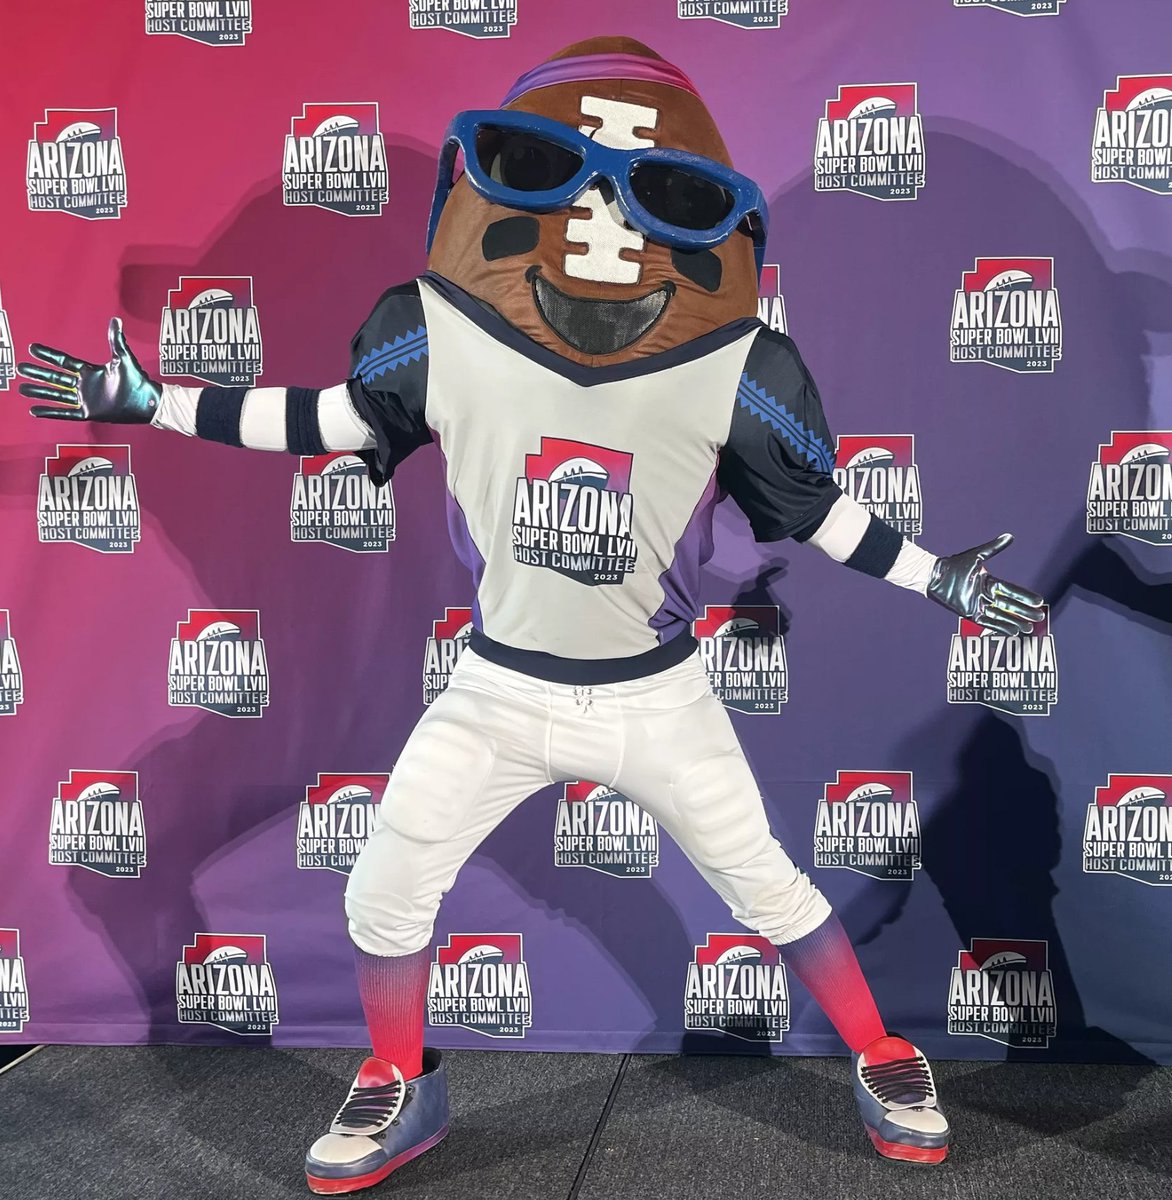 Today I learned that the Arizona Super Bowl Host Committee has its own mascot. This is 'Spike', a sunglasses, eyeblack, and headband-wearing giant smiling anthropomorphic football. (pic via Axios)